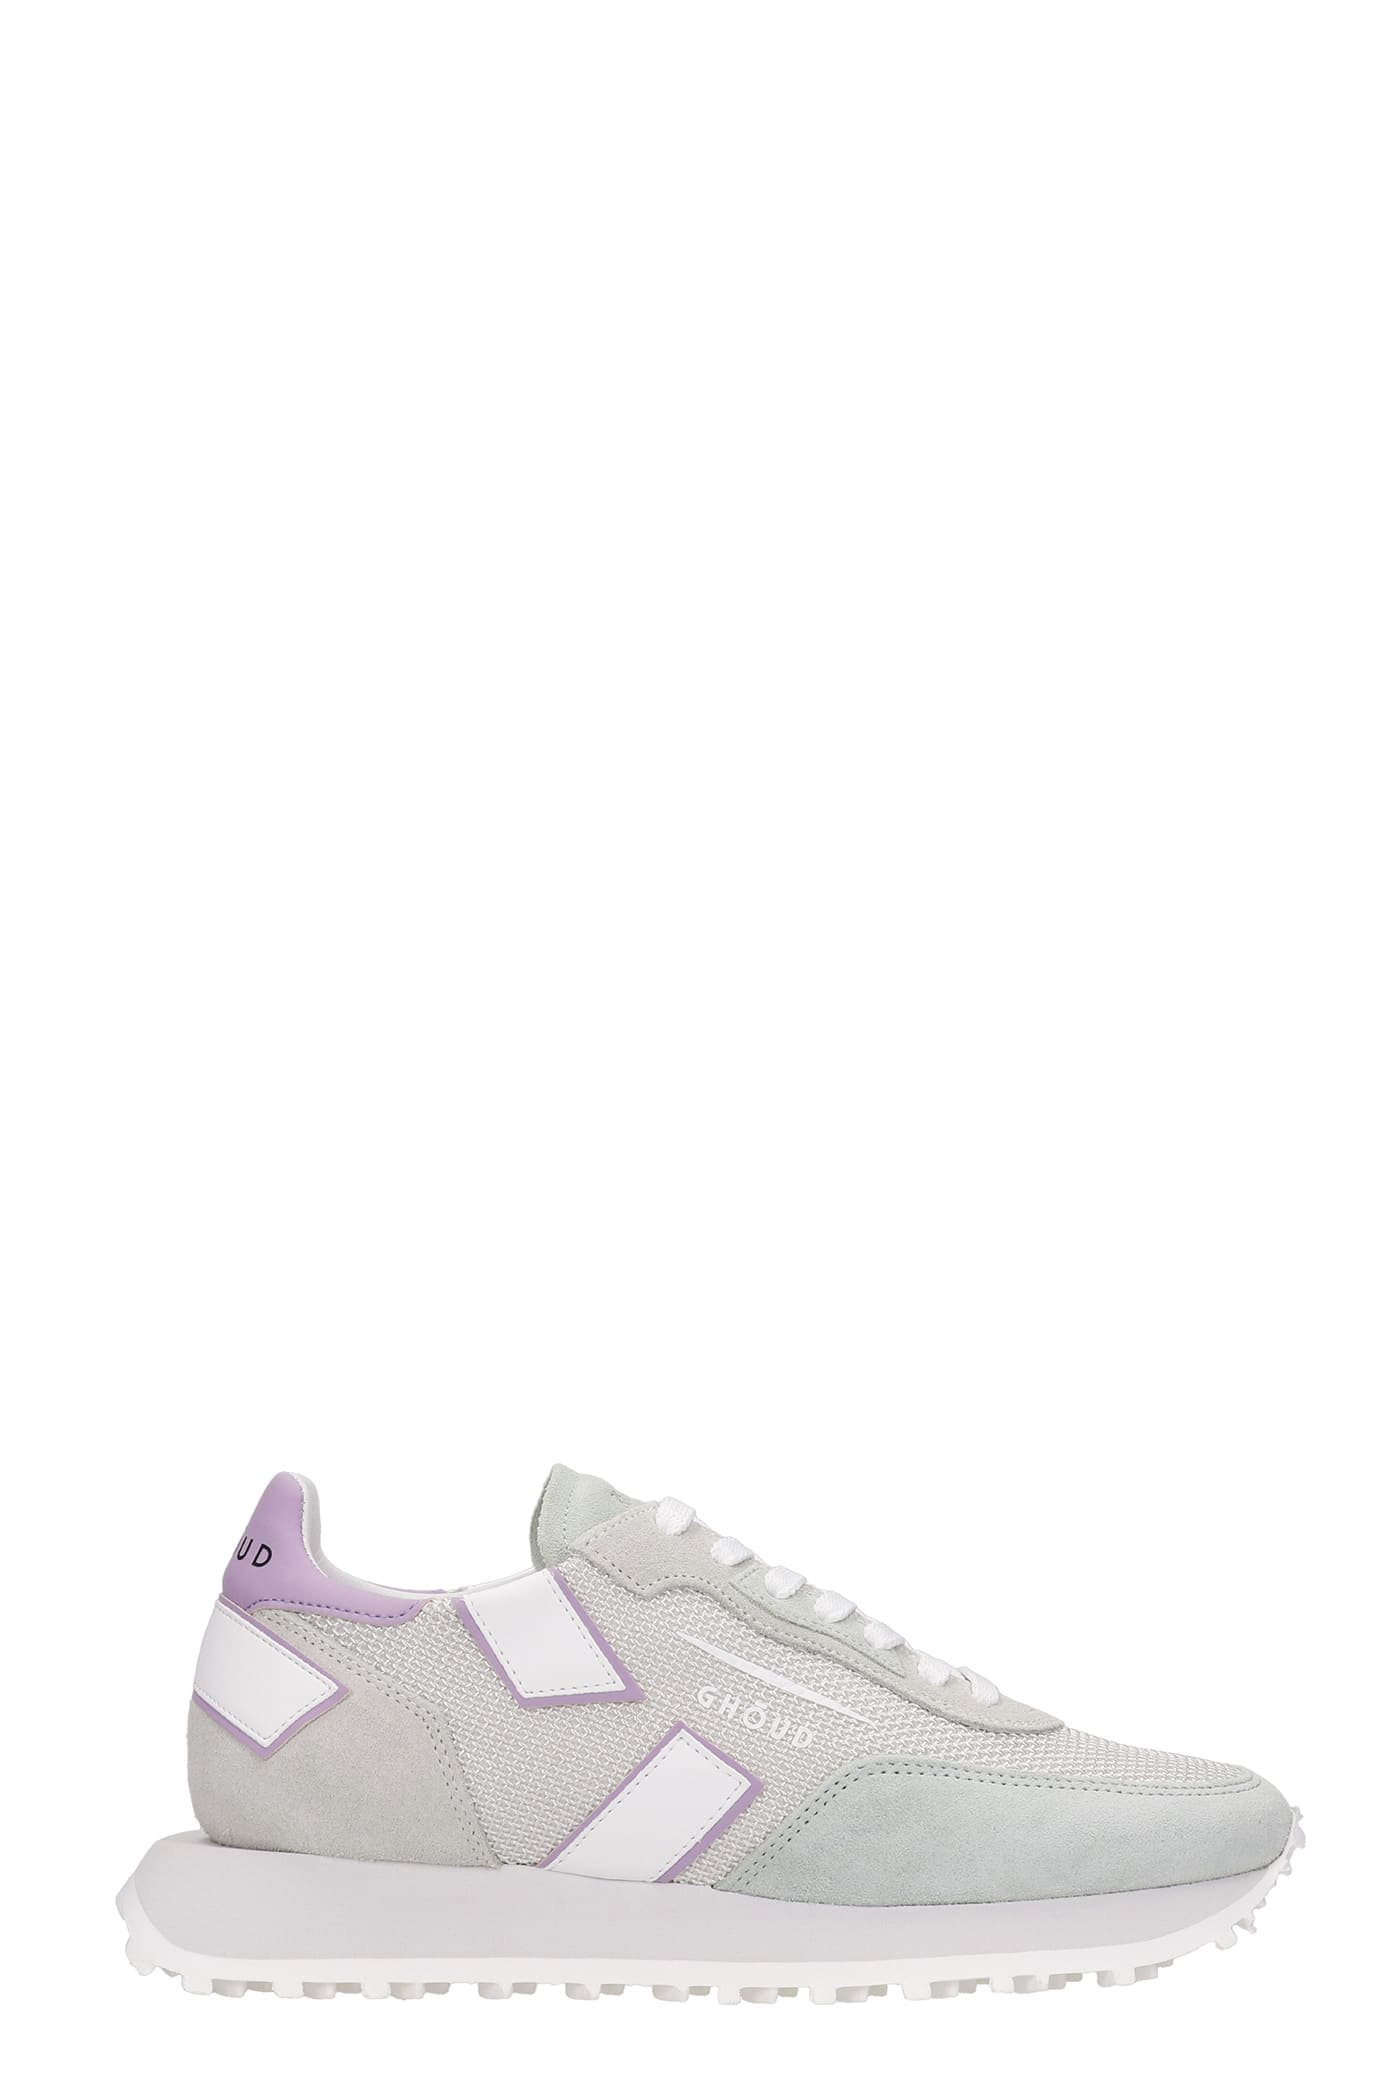 GHOUD Rush One Sneakers In Grey Suede And Fabric